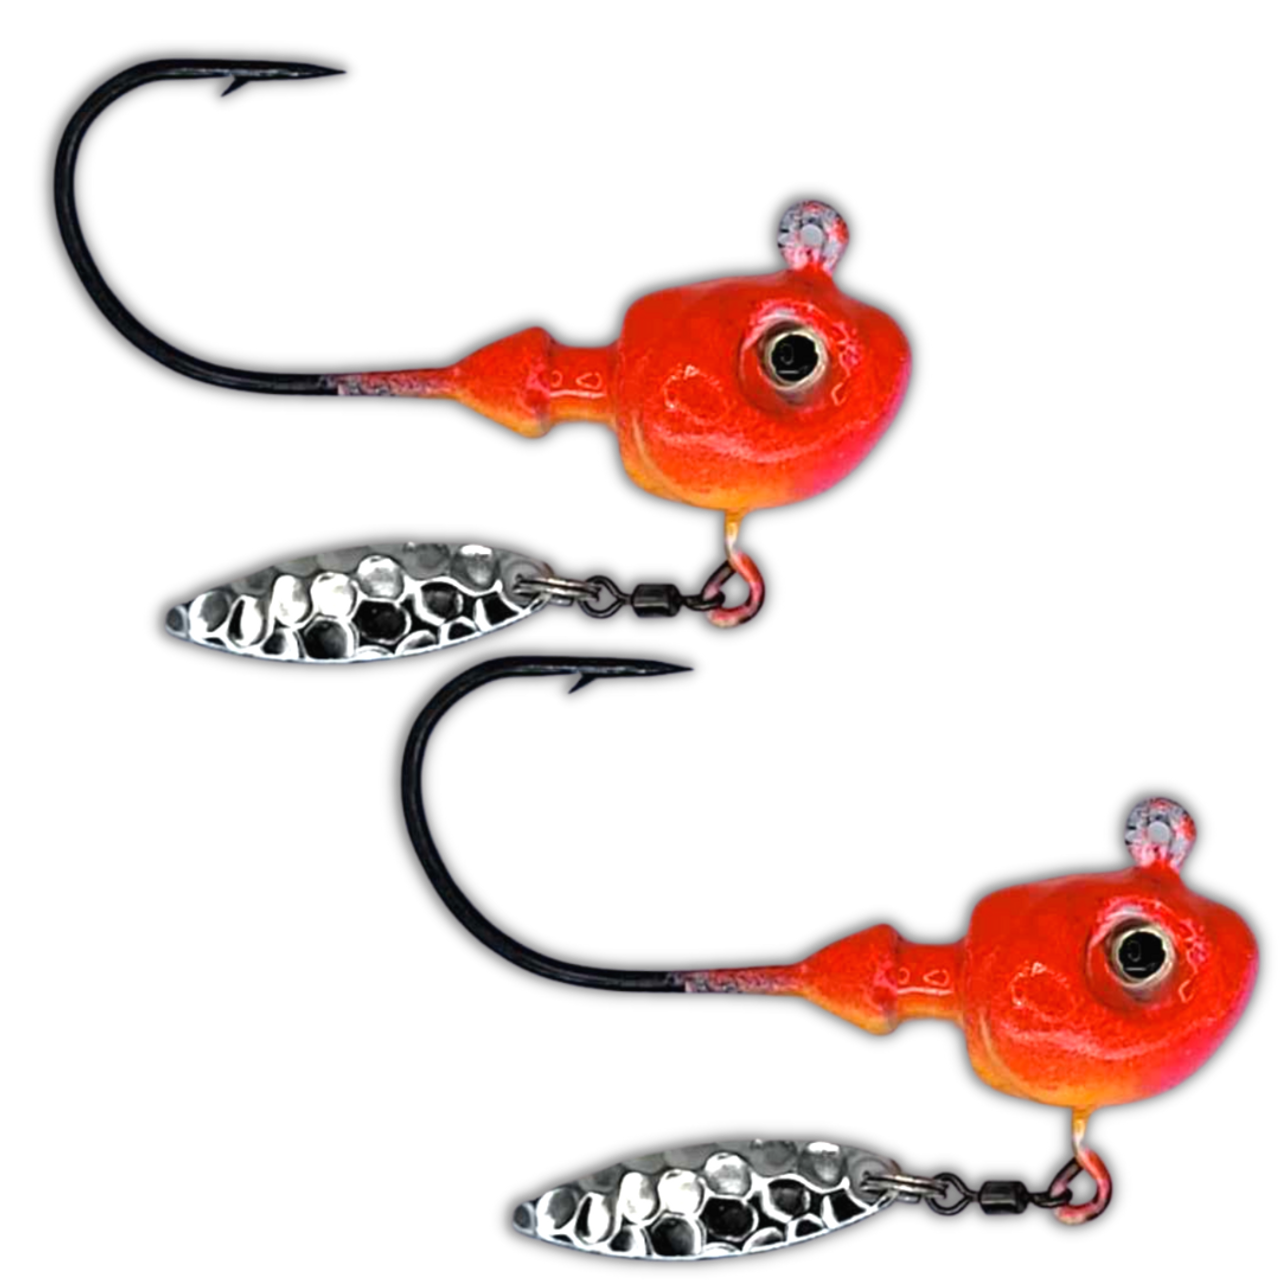 The HECLA HAMMER JIGS

These bad boys were custom created for meeting the needs of those anglers on Lake Winnipeg or needing a beefed up hook. They feature a current cutting design, 3D eyes, stout strong reinforced lead style and a beefy wide gap hook perfect for pairing with plastics and large minnows but still enough real estate to get a great hook set 10 out of the 12 designs feature Kryptonite Glow Paint Jobs.

We have a selection of them paired with willow leaf flasher blades and a selection without flashers.

You choose flasher or no flasher and which size.

1 oz, 1/2 oz, 1/4 oz

These are multi species and multi purpose for targeting large greenbacks, burbot, lake trout and pike.

 

 